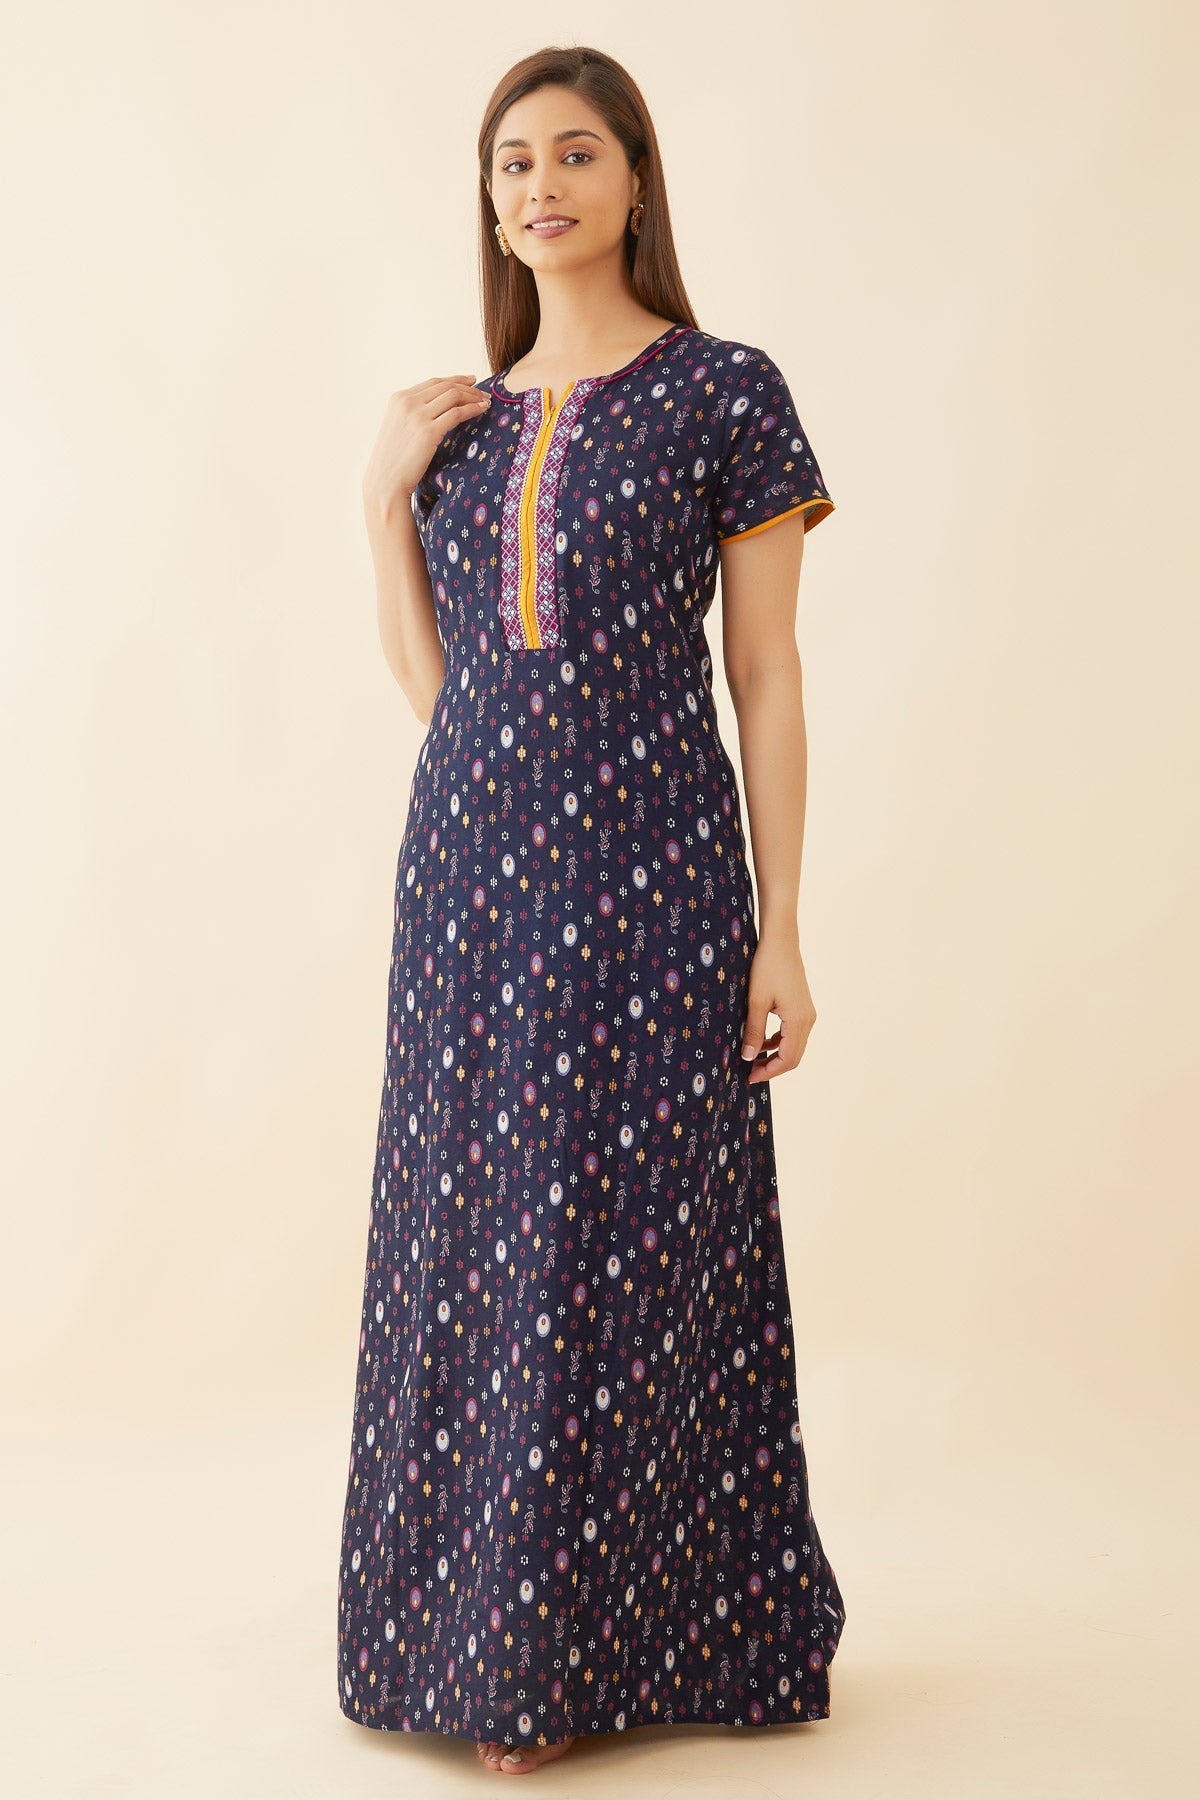 All Over Geometric Print With Contrast Embroidered Yoke Nighty - Navy